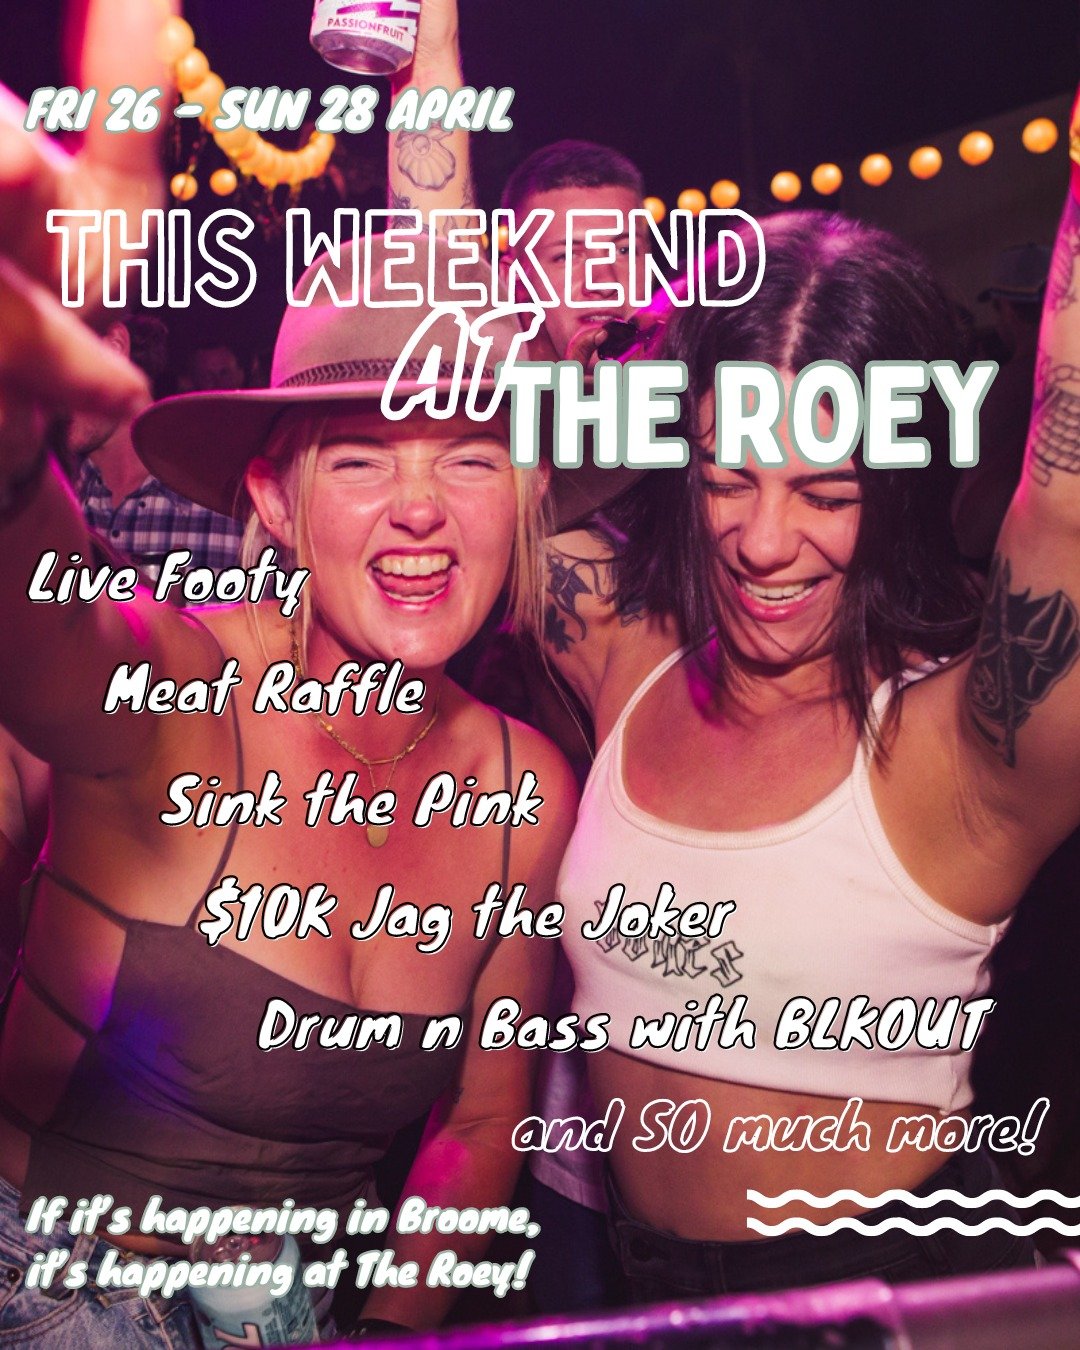 Awwwww yeah 🥳 show us your FriYAY faces!

It will come as no surprise that we have yet another huge weekend planned for you this week, because when it comes to the party, we just cant help ourselves 🤘🏽😝

FRI 26th 
🎱Sink the Pink, tickets from 3p